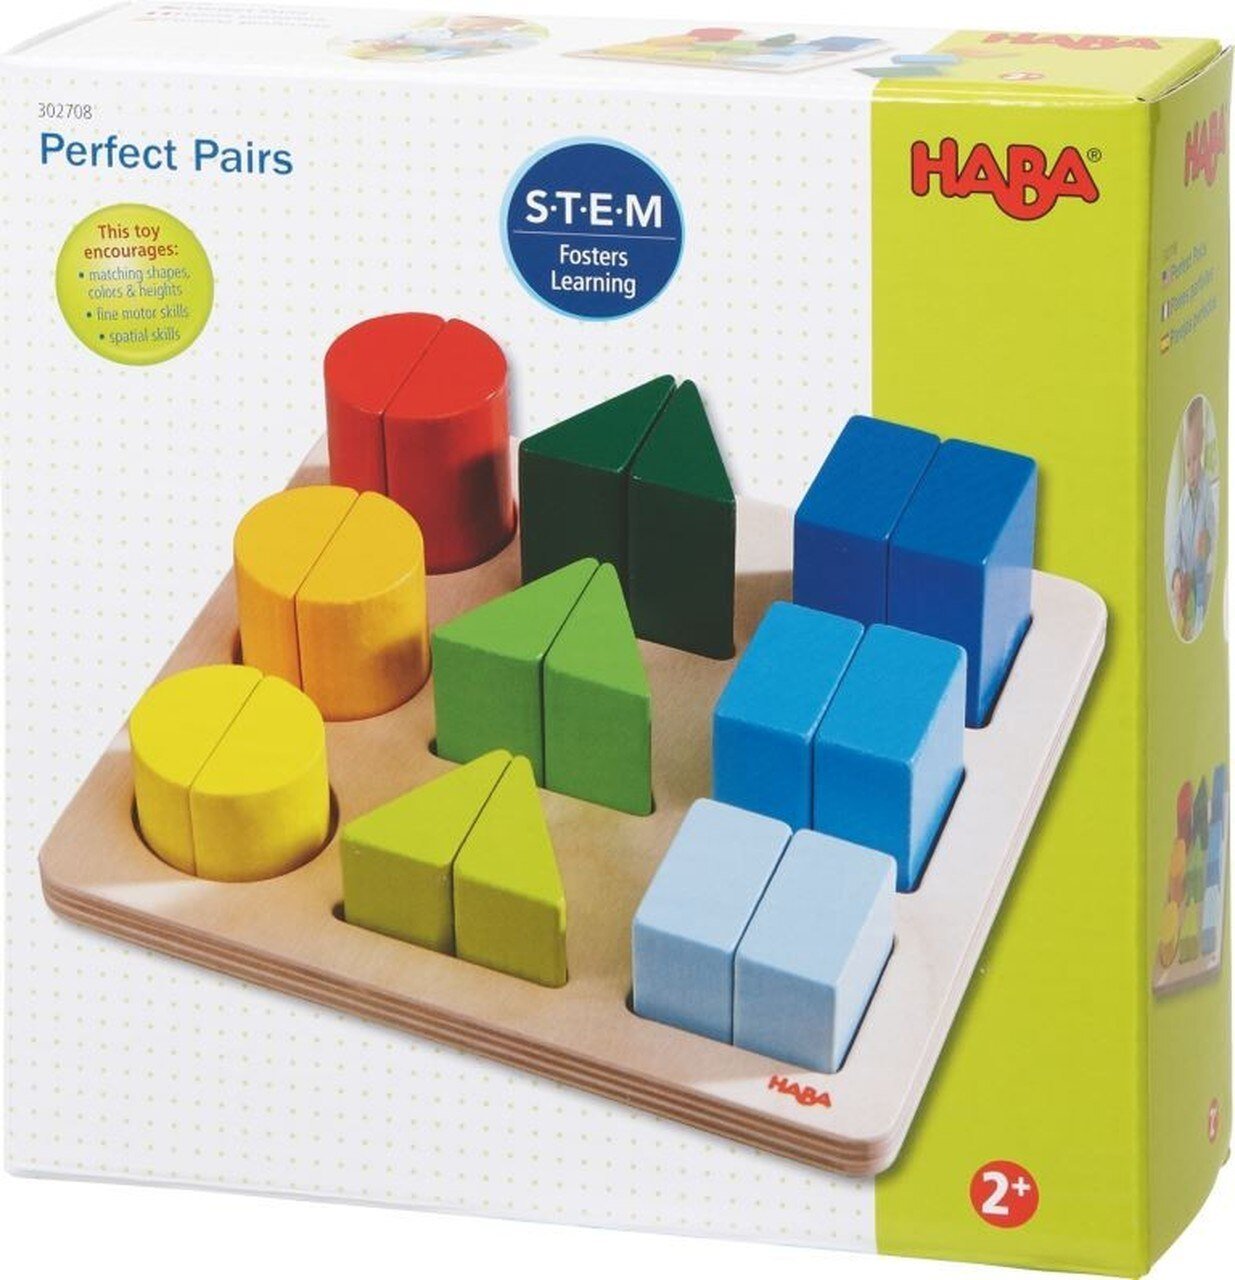 HABA Perfect Pairs - Wood Wood Toys Canada's Favourite Montessori Toy Store